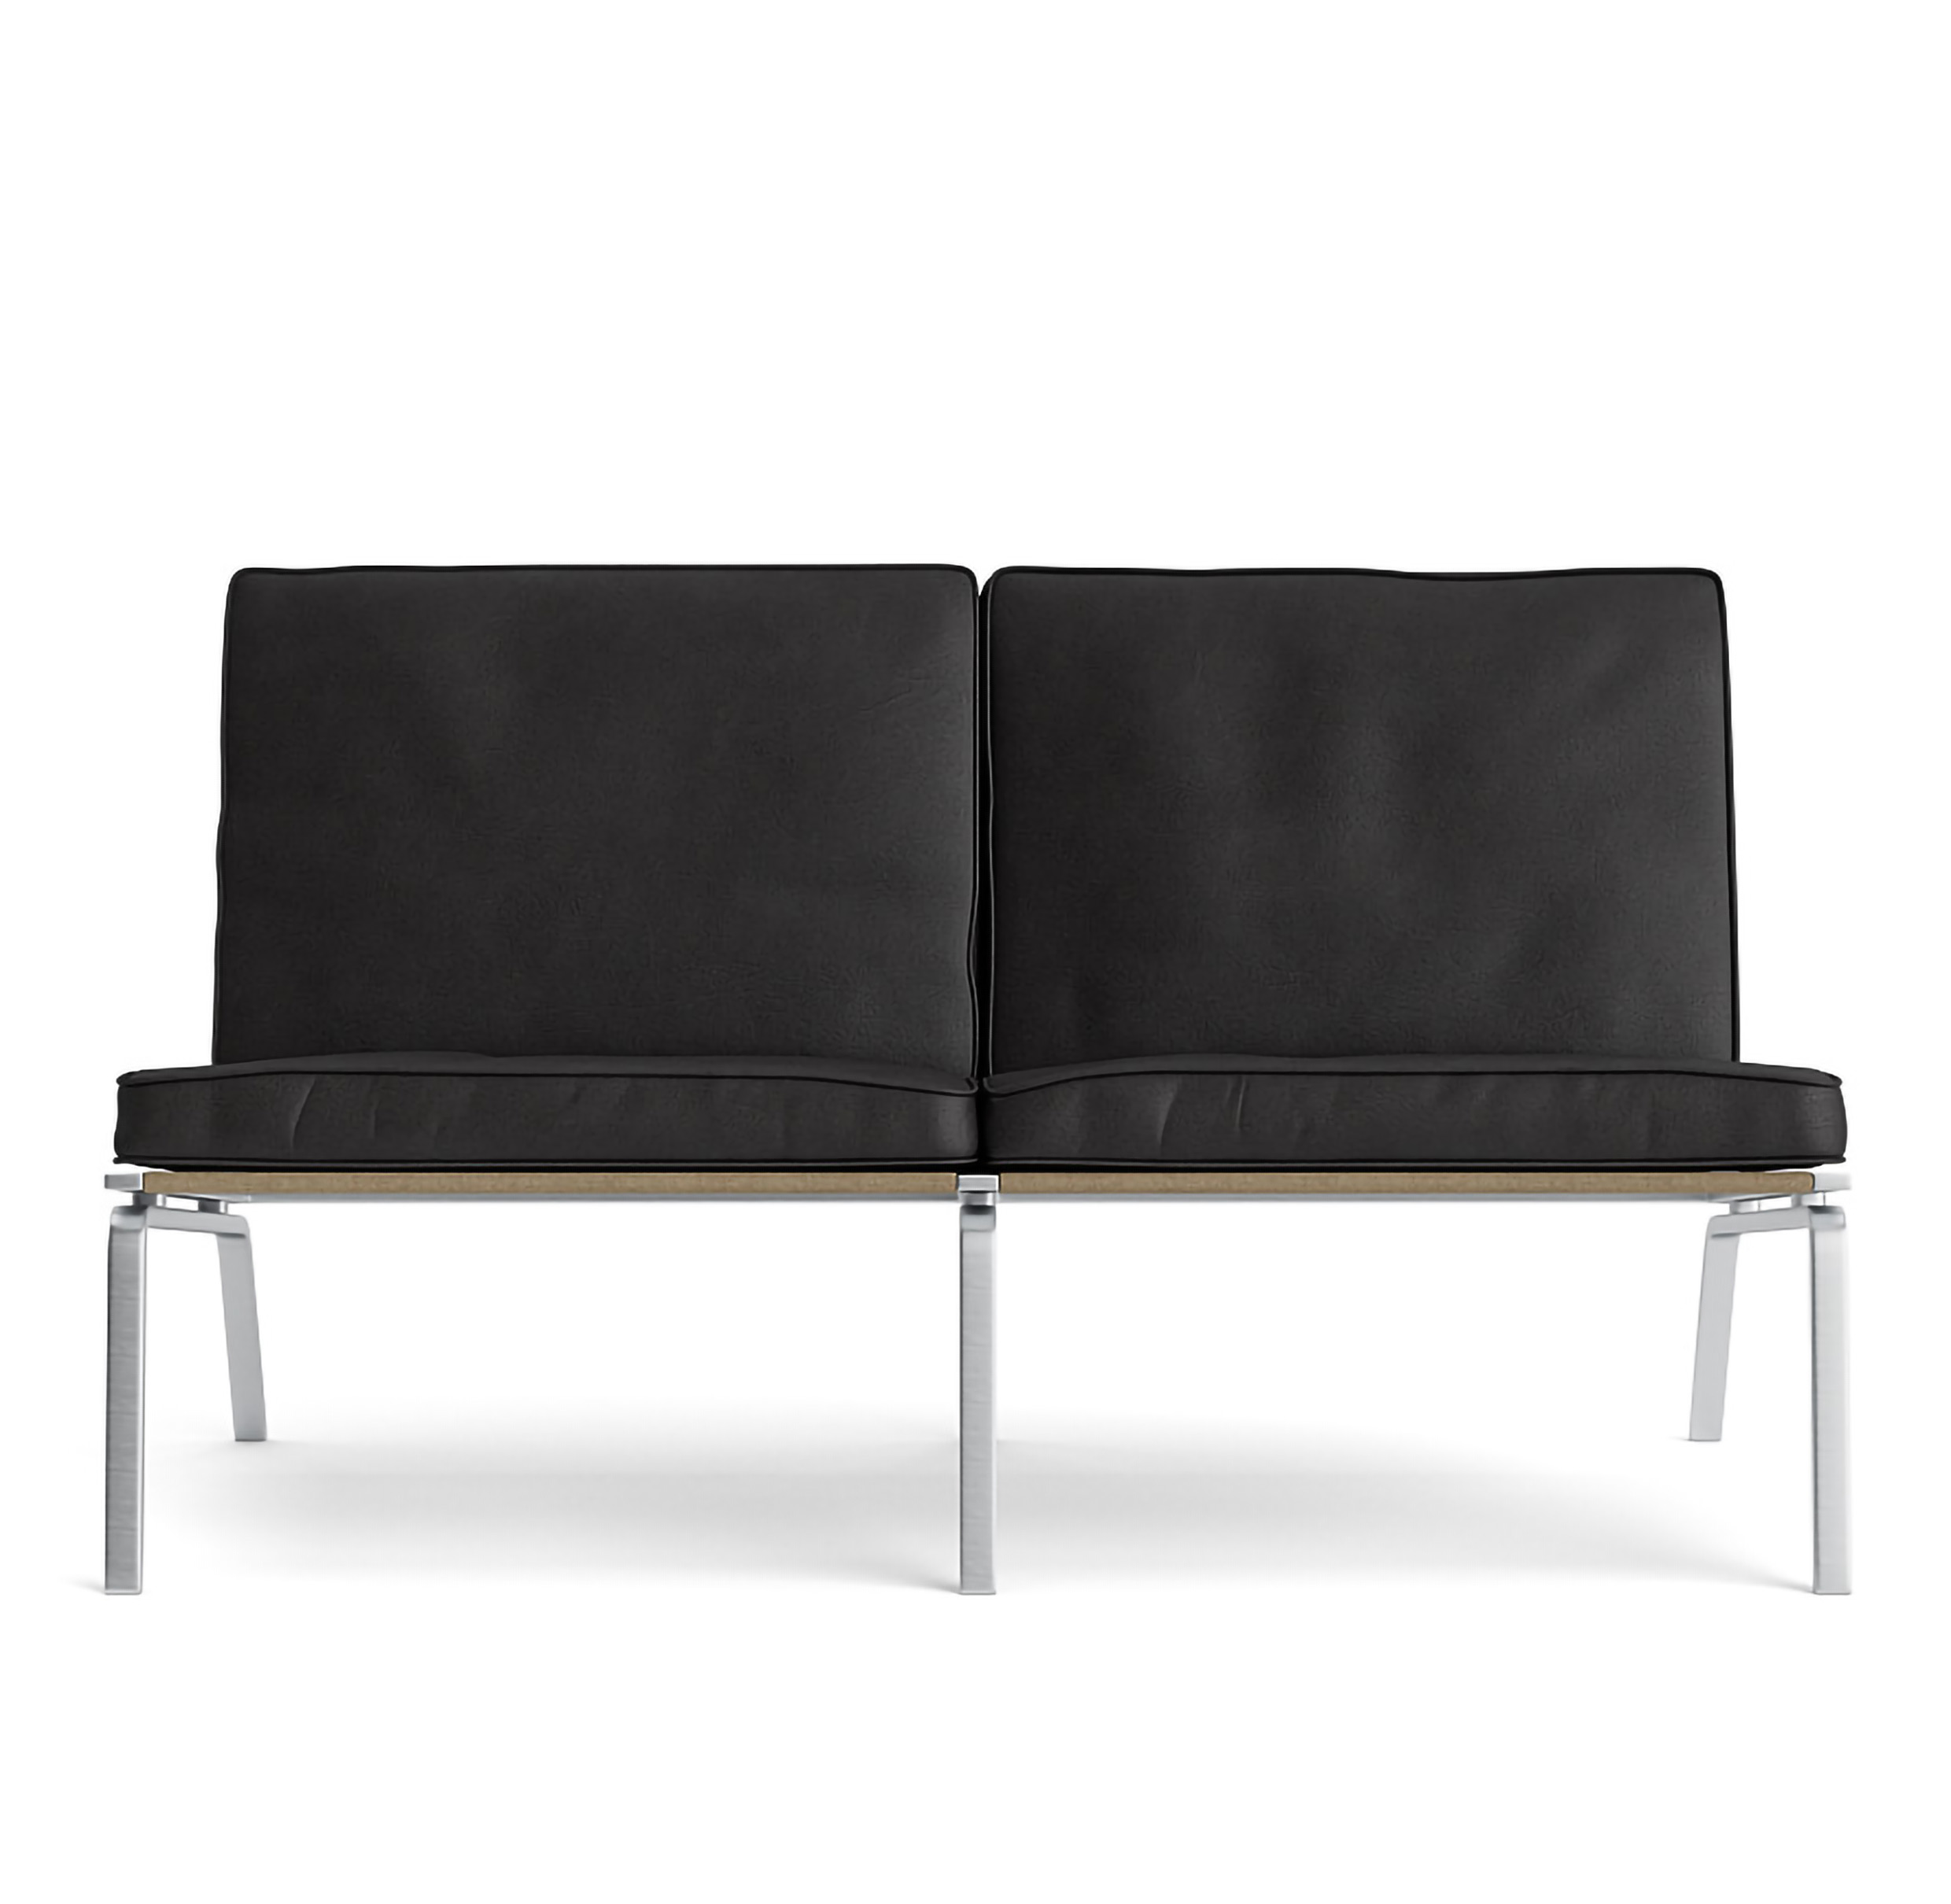 NORR11 // MAN - 2-SEATER-SOFA | STEEL | LEATHER DUNES ANTHRACITE 21003